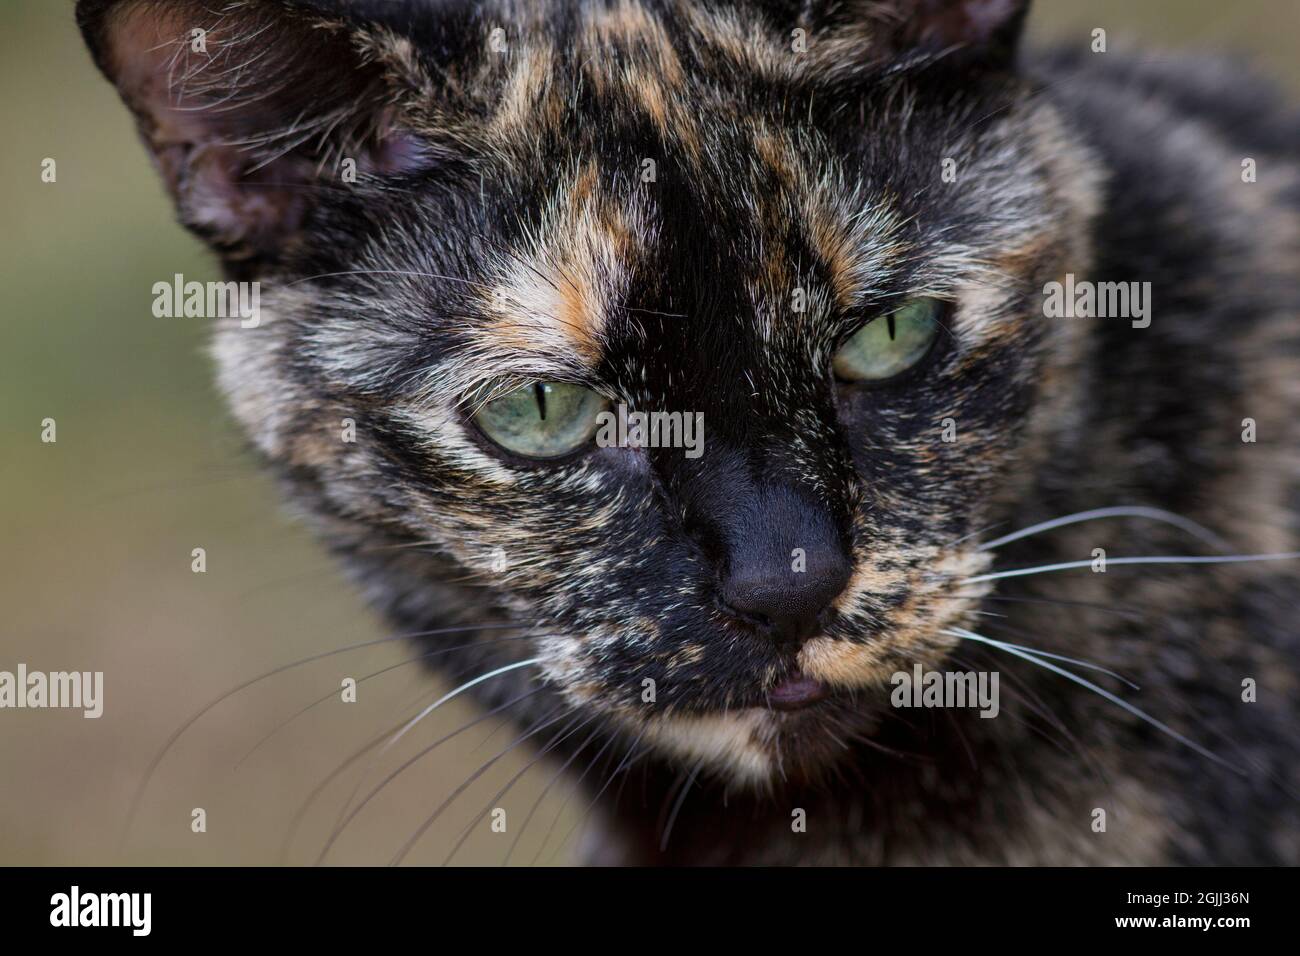 Closeup of Tortie staring intently at something off camera Stock Photo